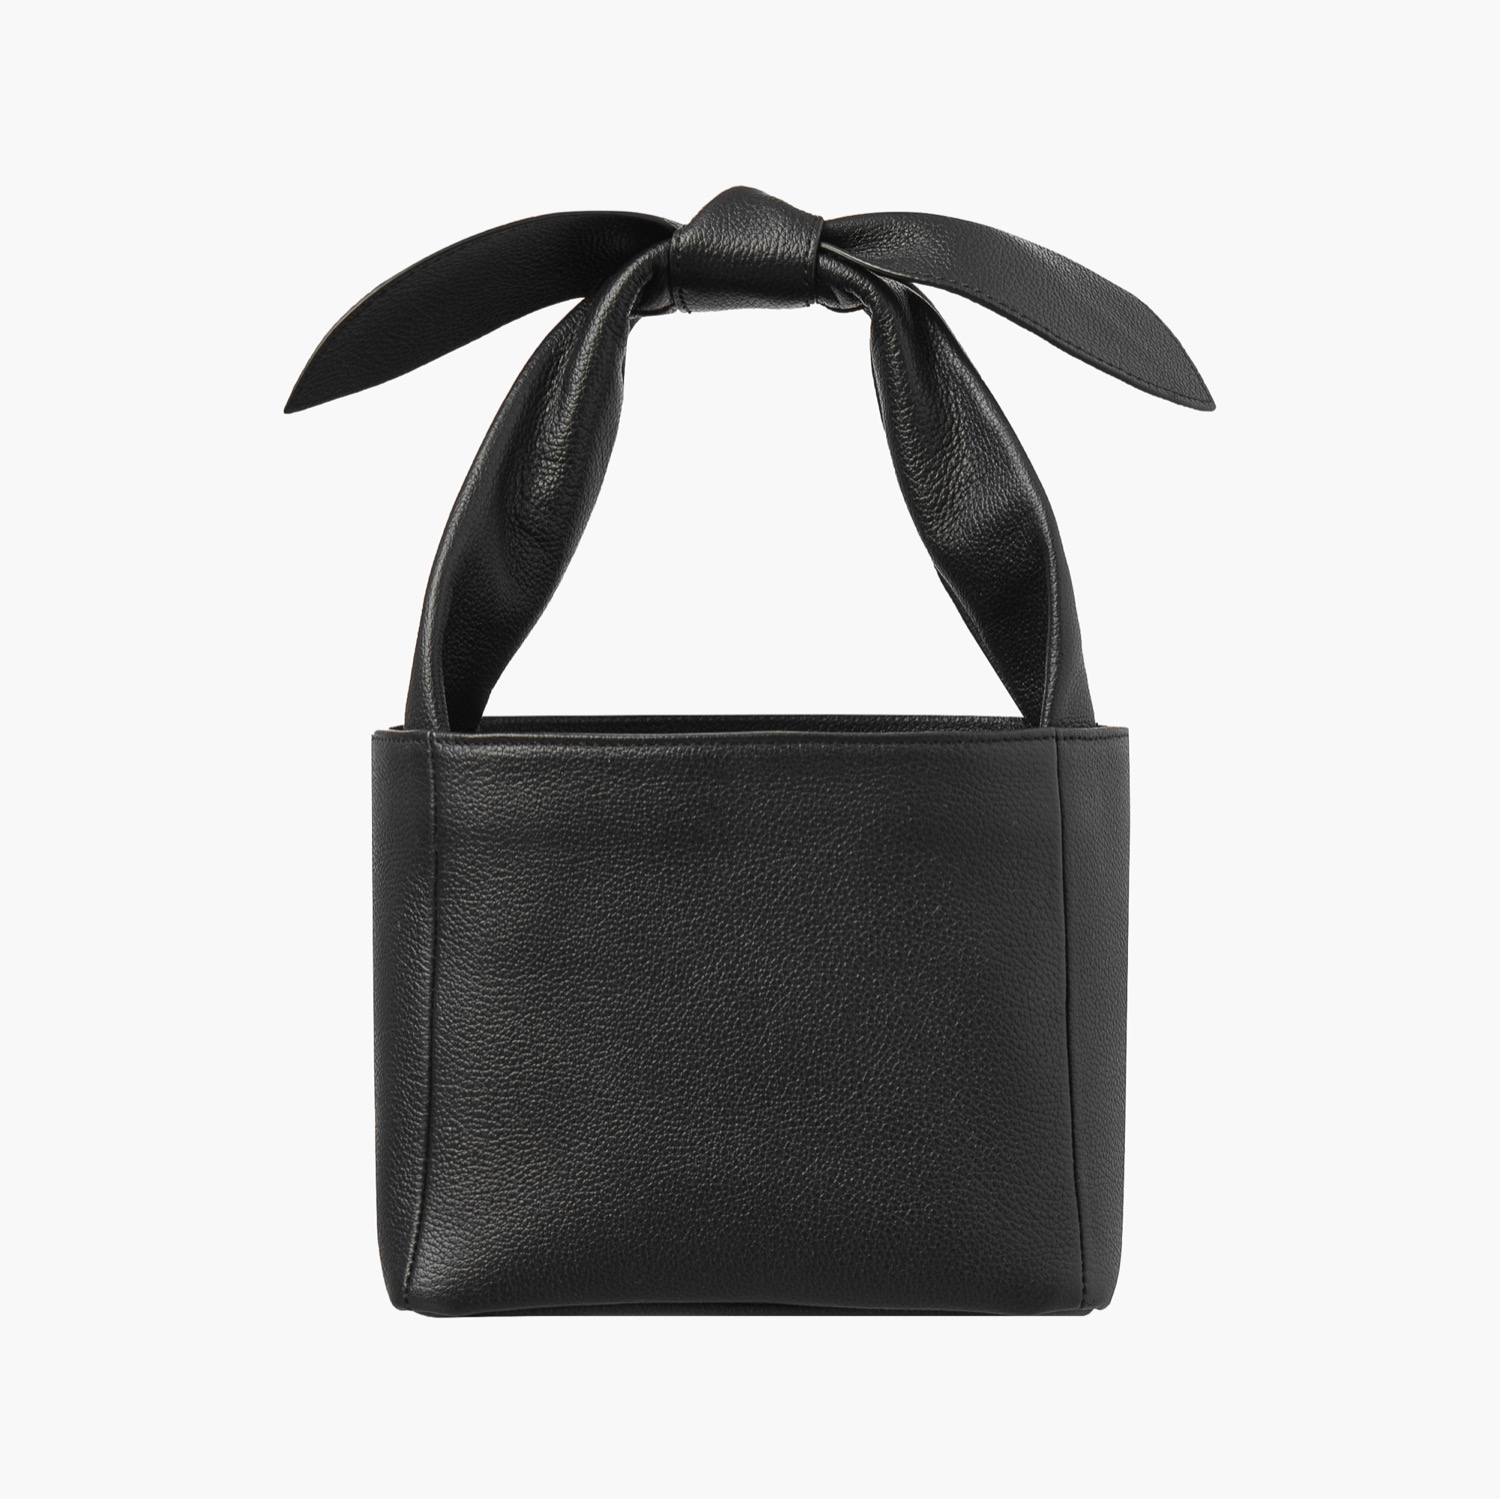 KNOTTED HANDLE LEATHER BAG, BLACK